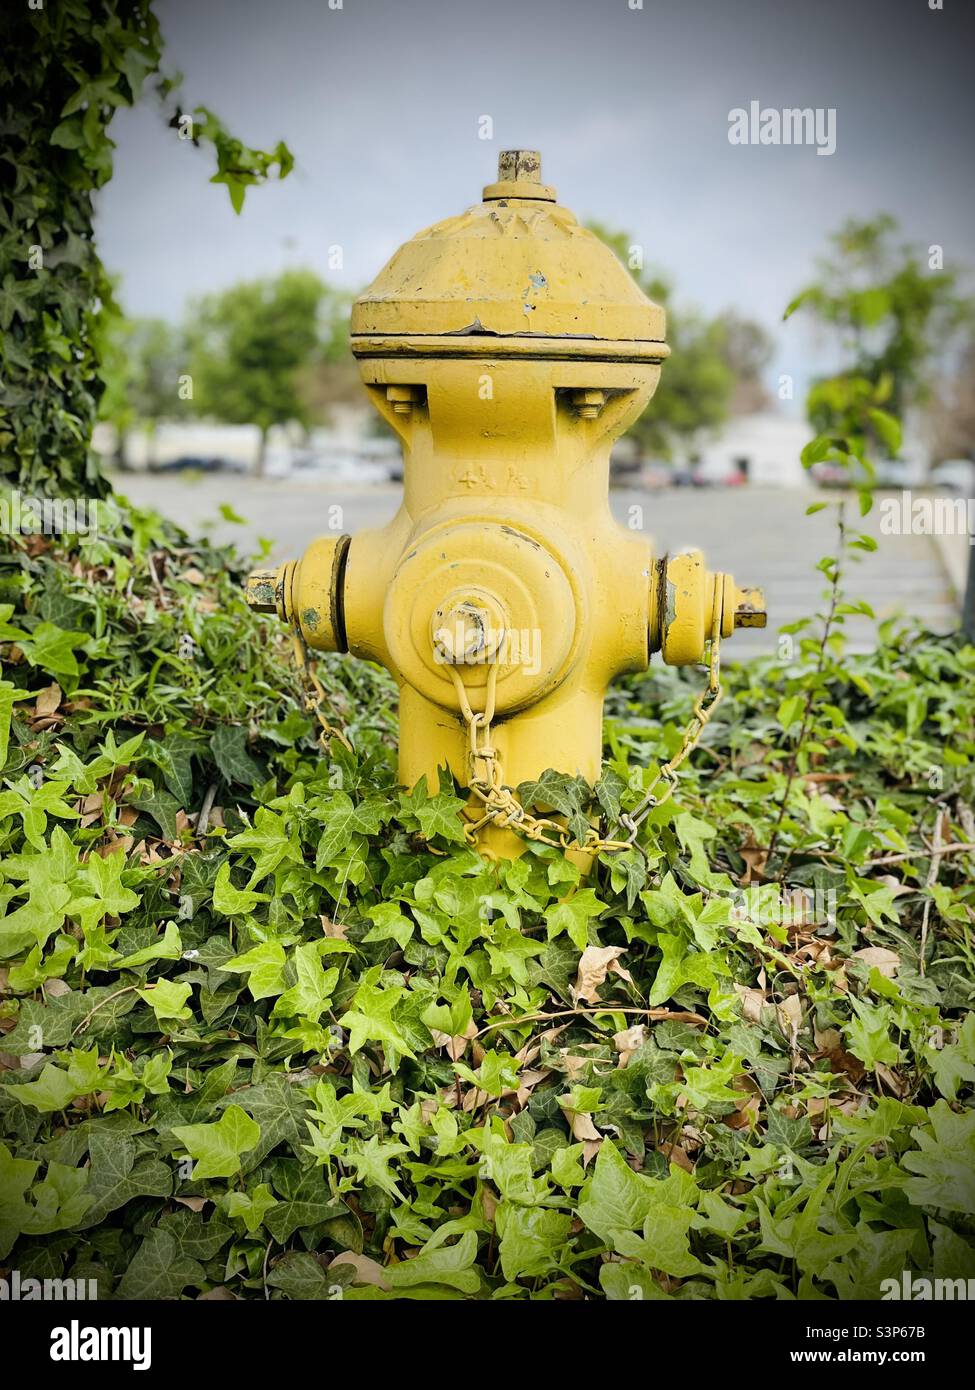 Yellow fire hydrant covered in Ivy Stock Photo